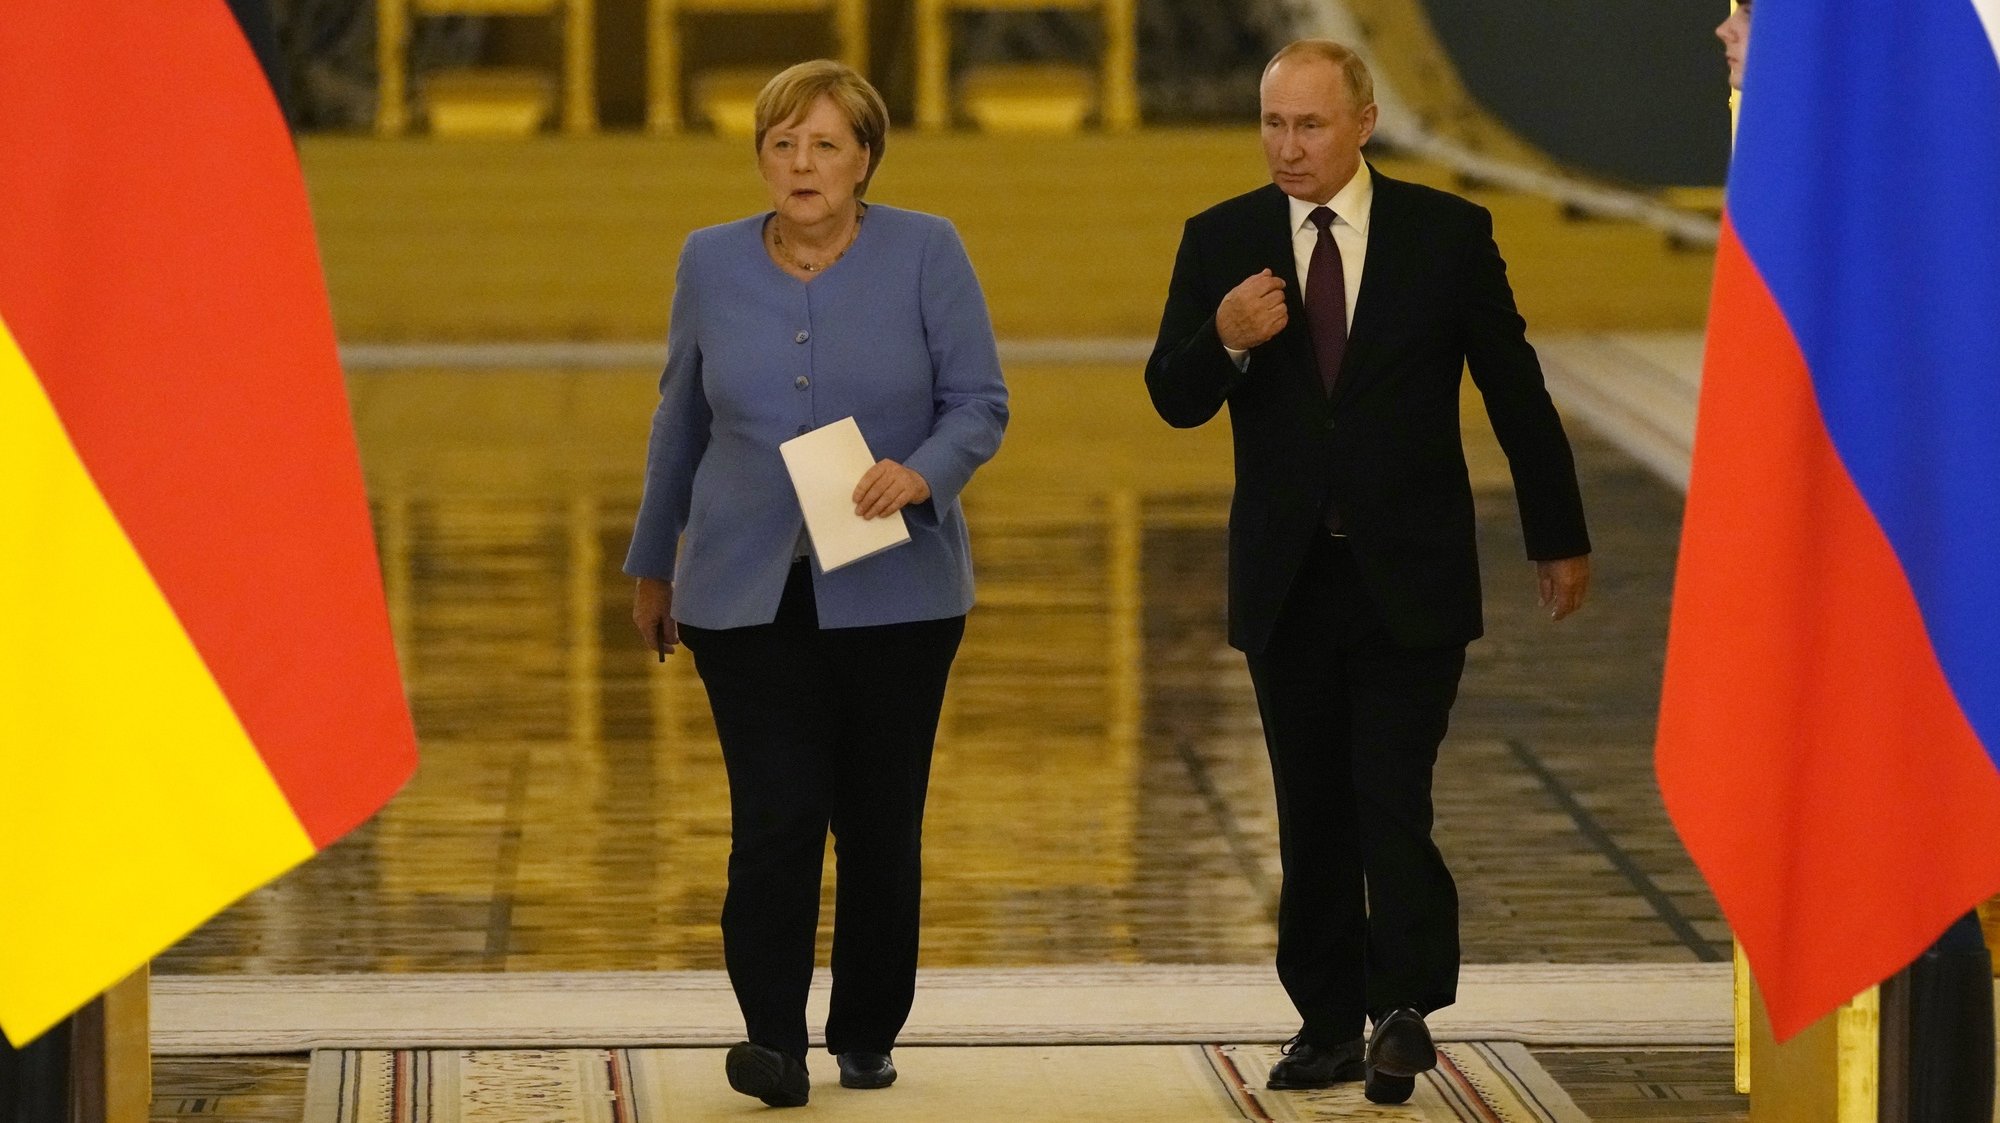 epa09422192 German Chancellor Angela Merkel (L) and Russian President Vladimir Putin (R) arrive for a joint news conference following their talks in the Kremlin in Moscow, Russia, 20 August 2021.  German Chancellor Angela Merkel is on a working visit in Moscow.  EPA/ALEXANDER ZEMLIANICHENKO / POOL